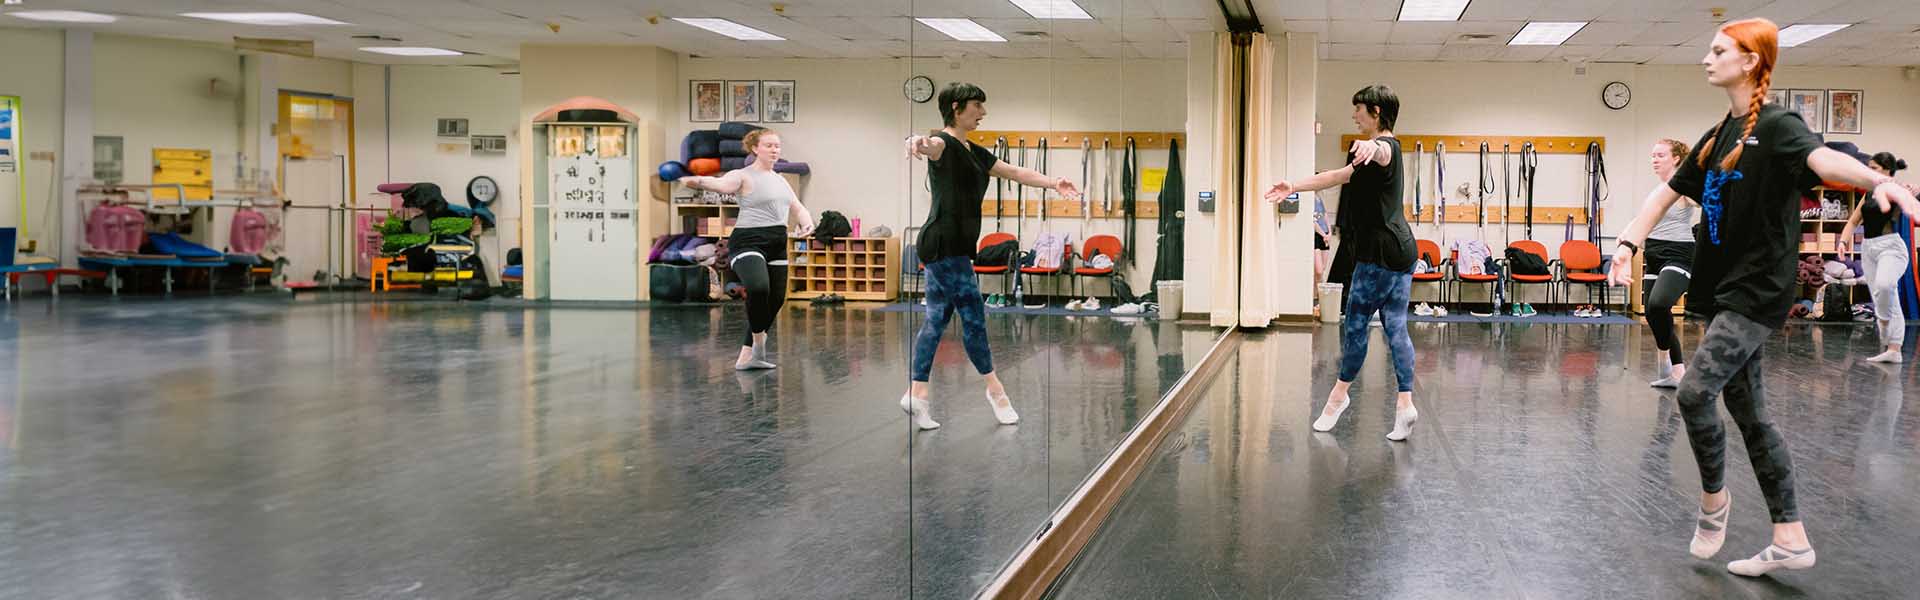 Students practicing their form in front of mirror in a dance class